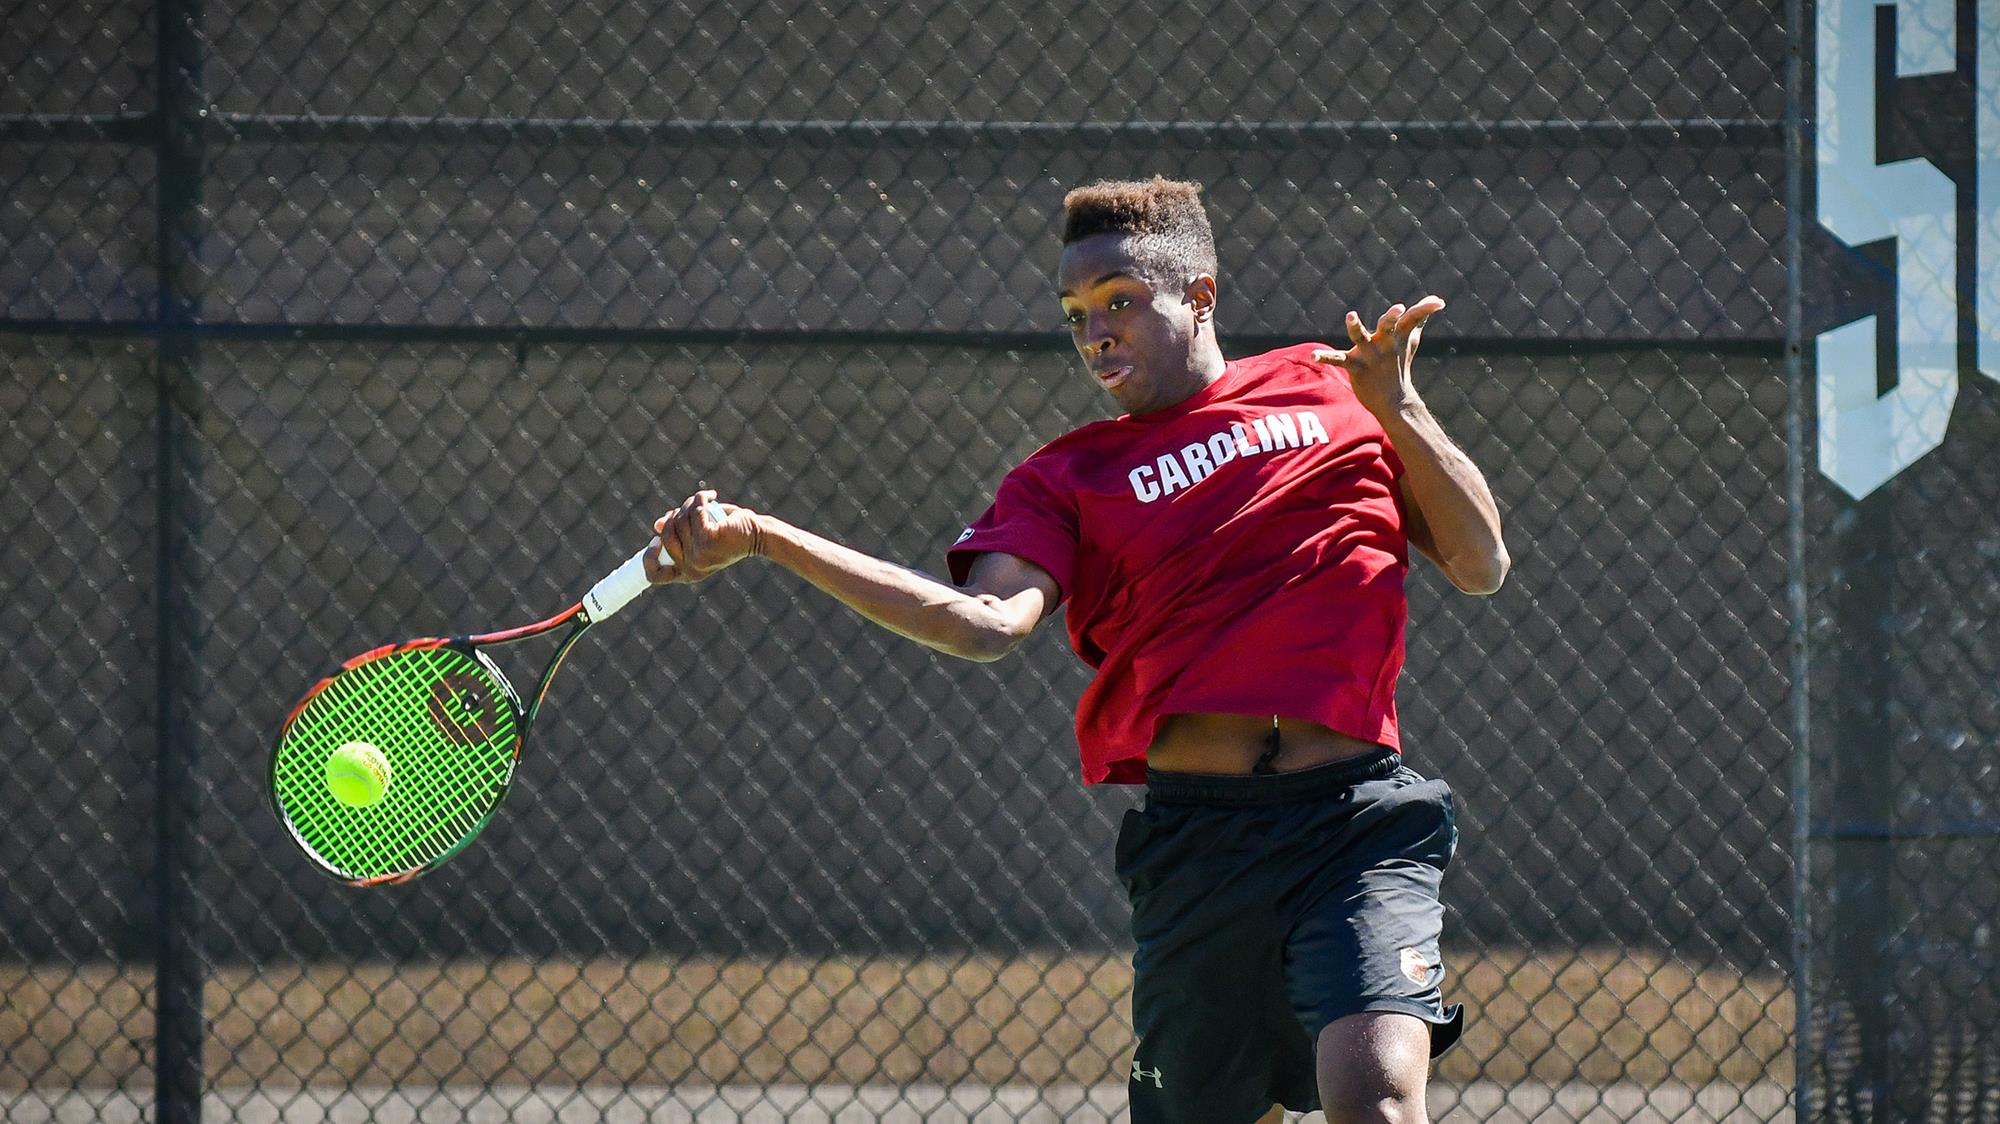 Jubb and Dennis Selected to ITA Fall National Championships